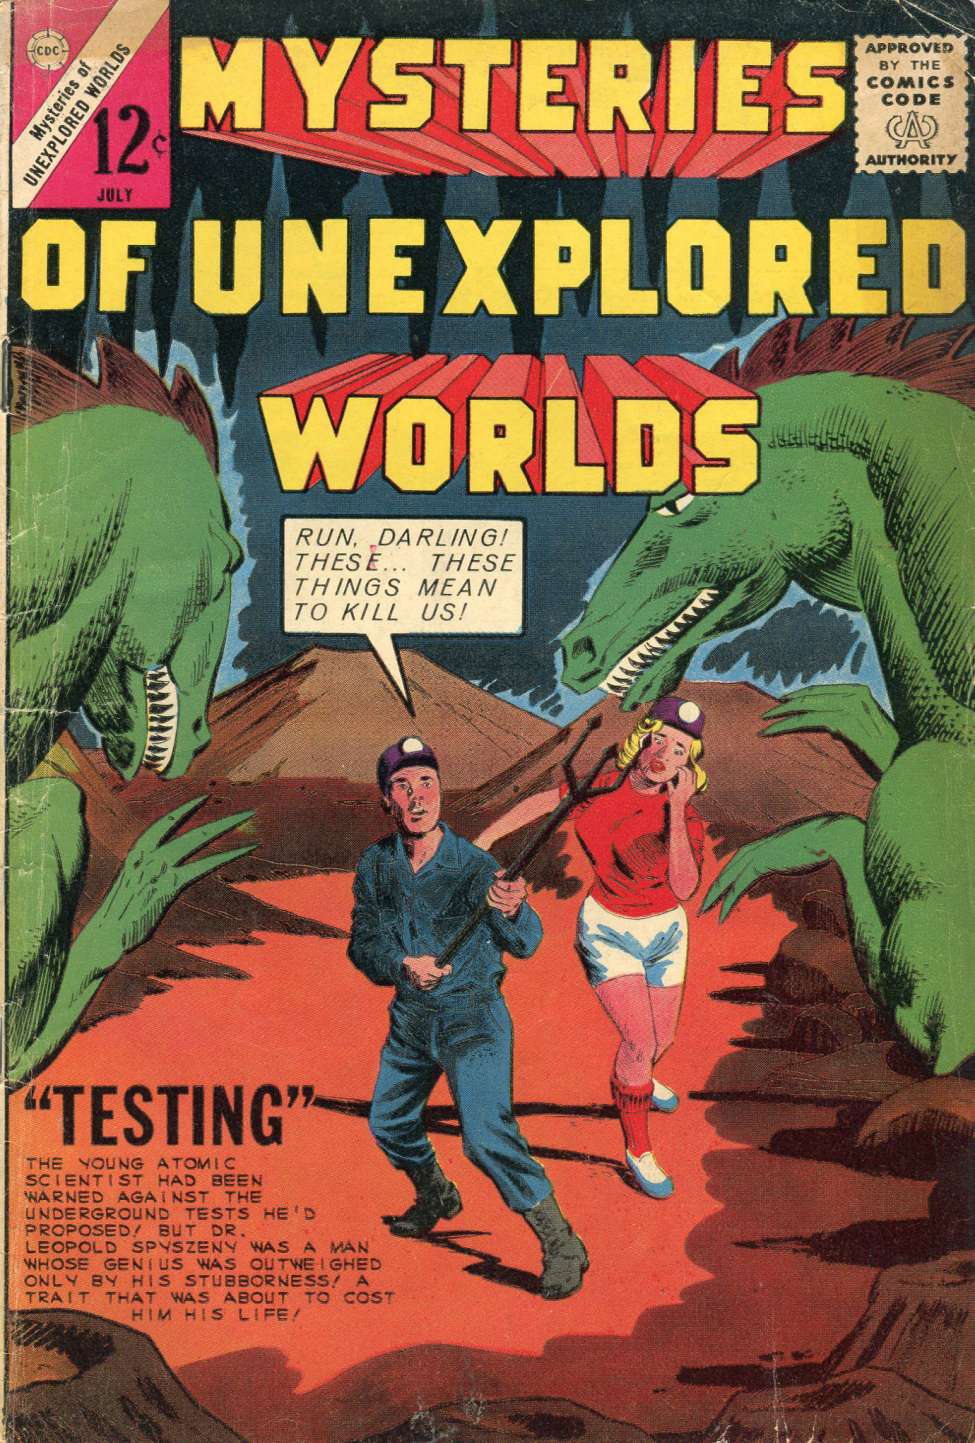 Book Cover For Mysteries of Unexplored Worlds 42